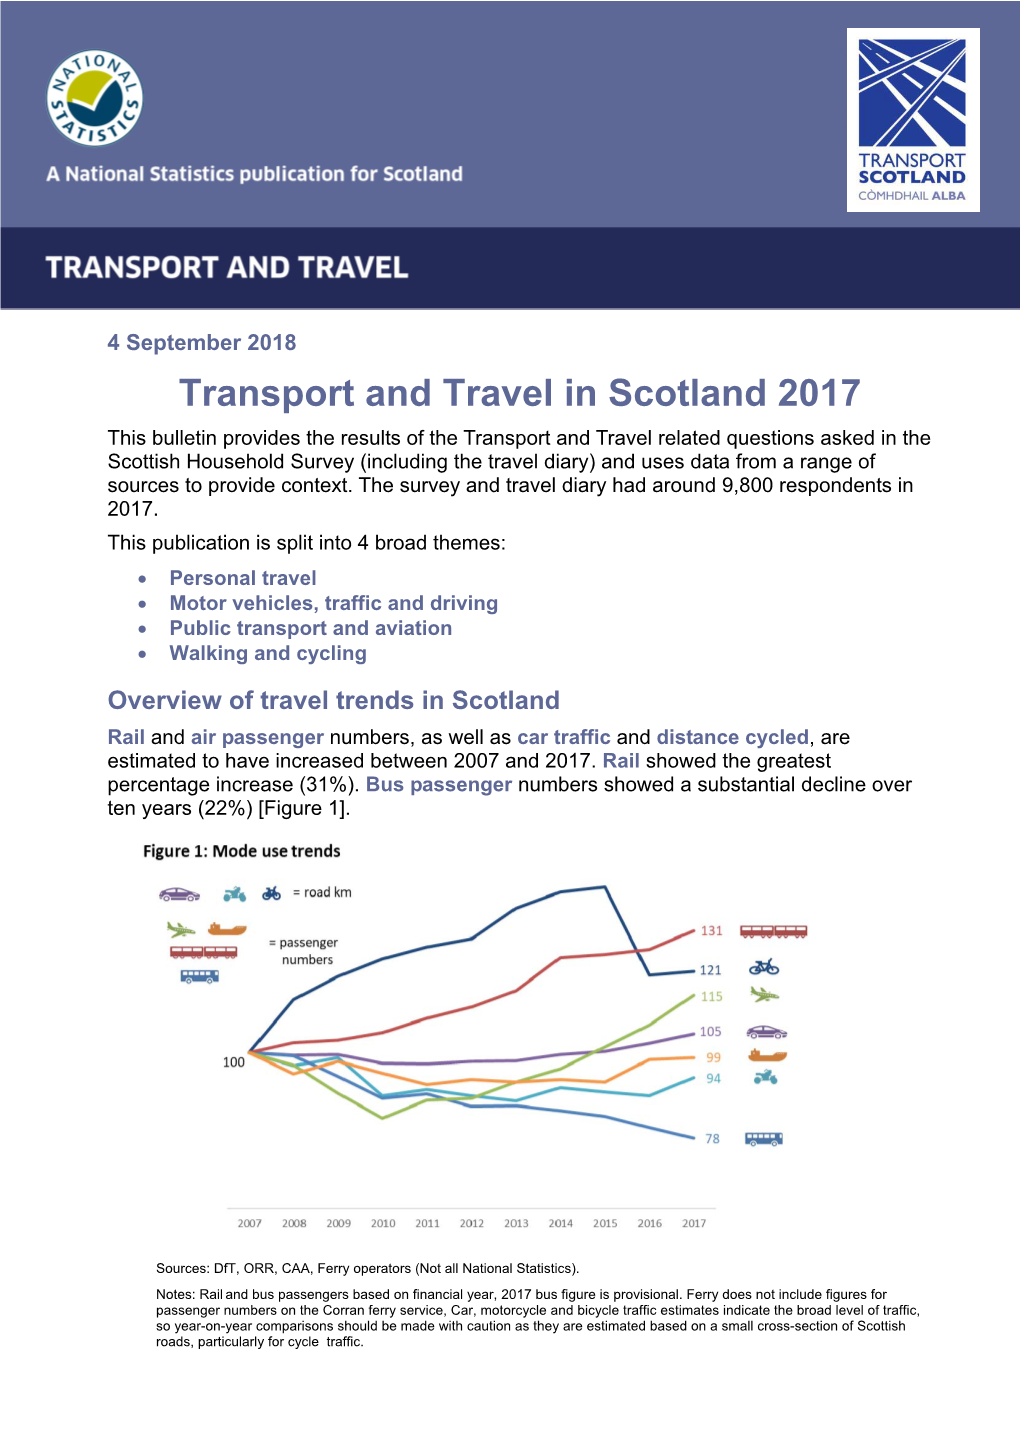 Transport and Travel in Scotland 2017